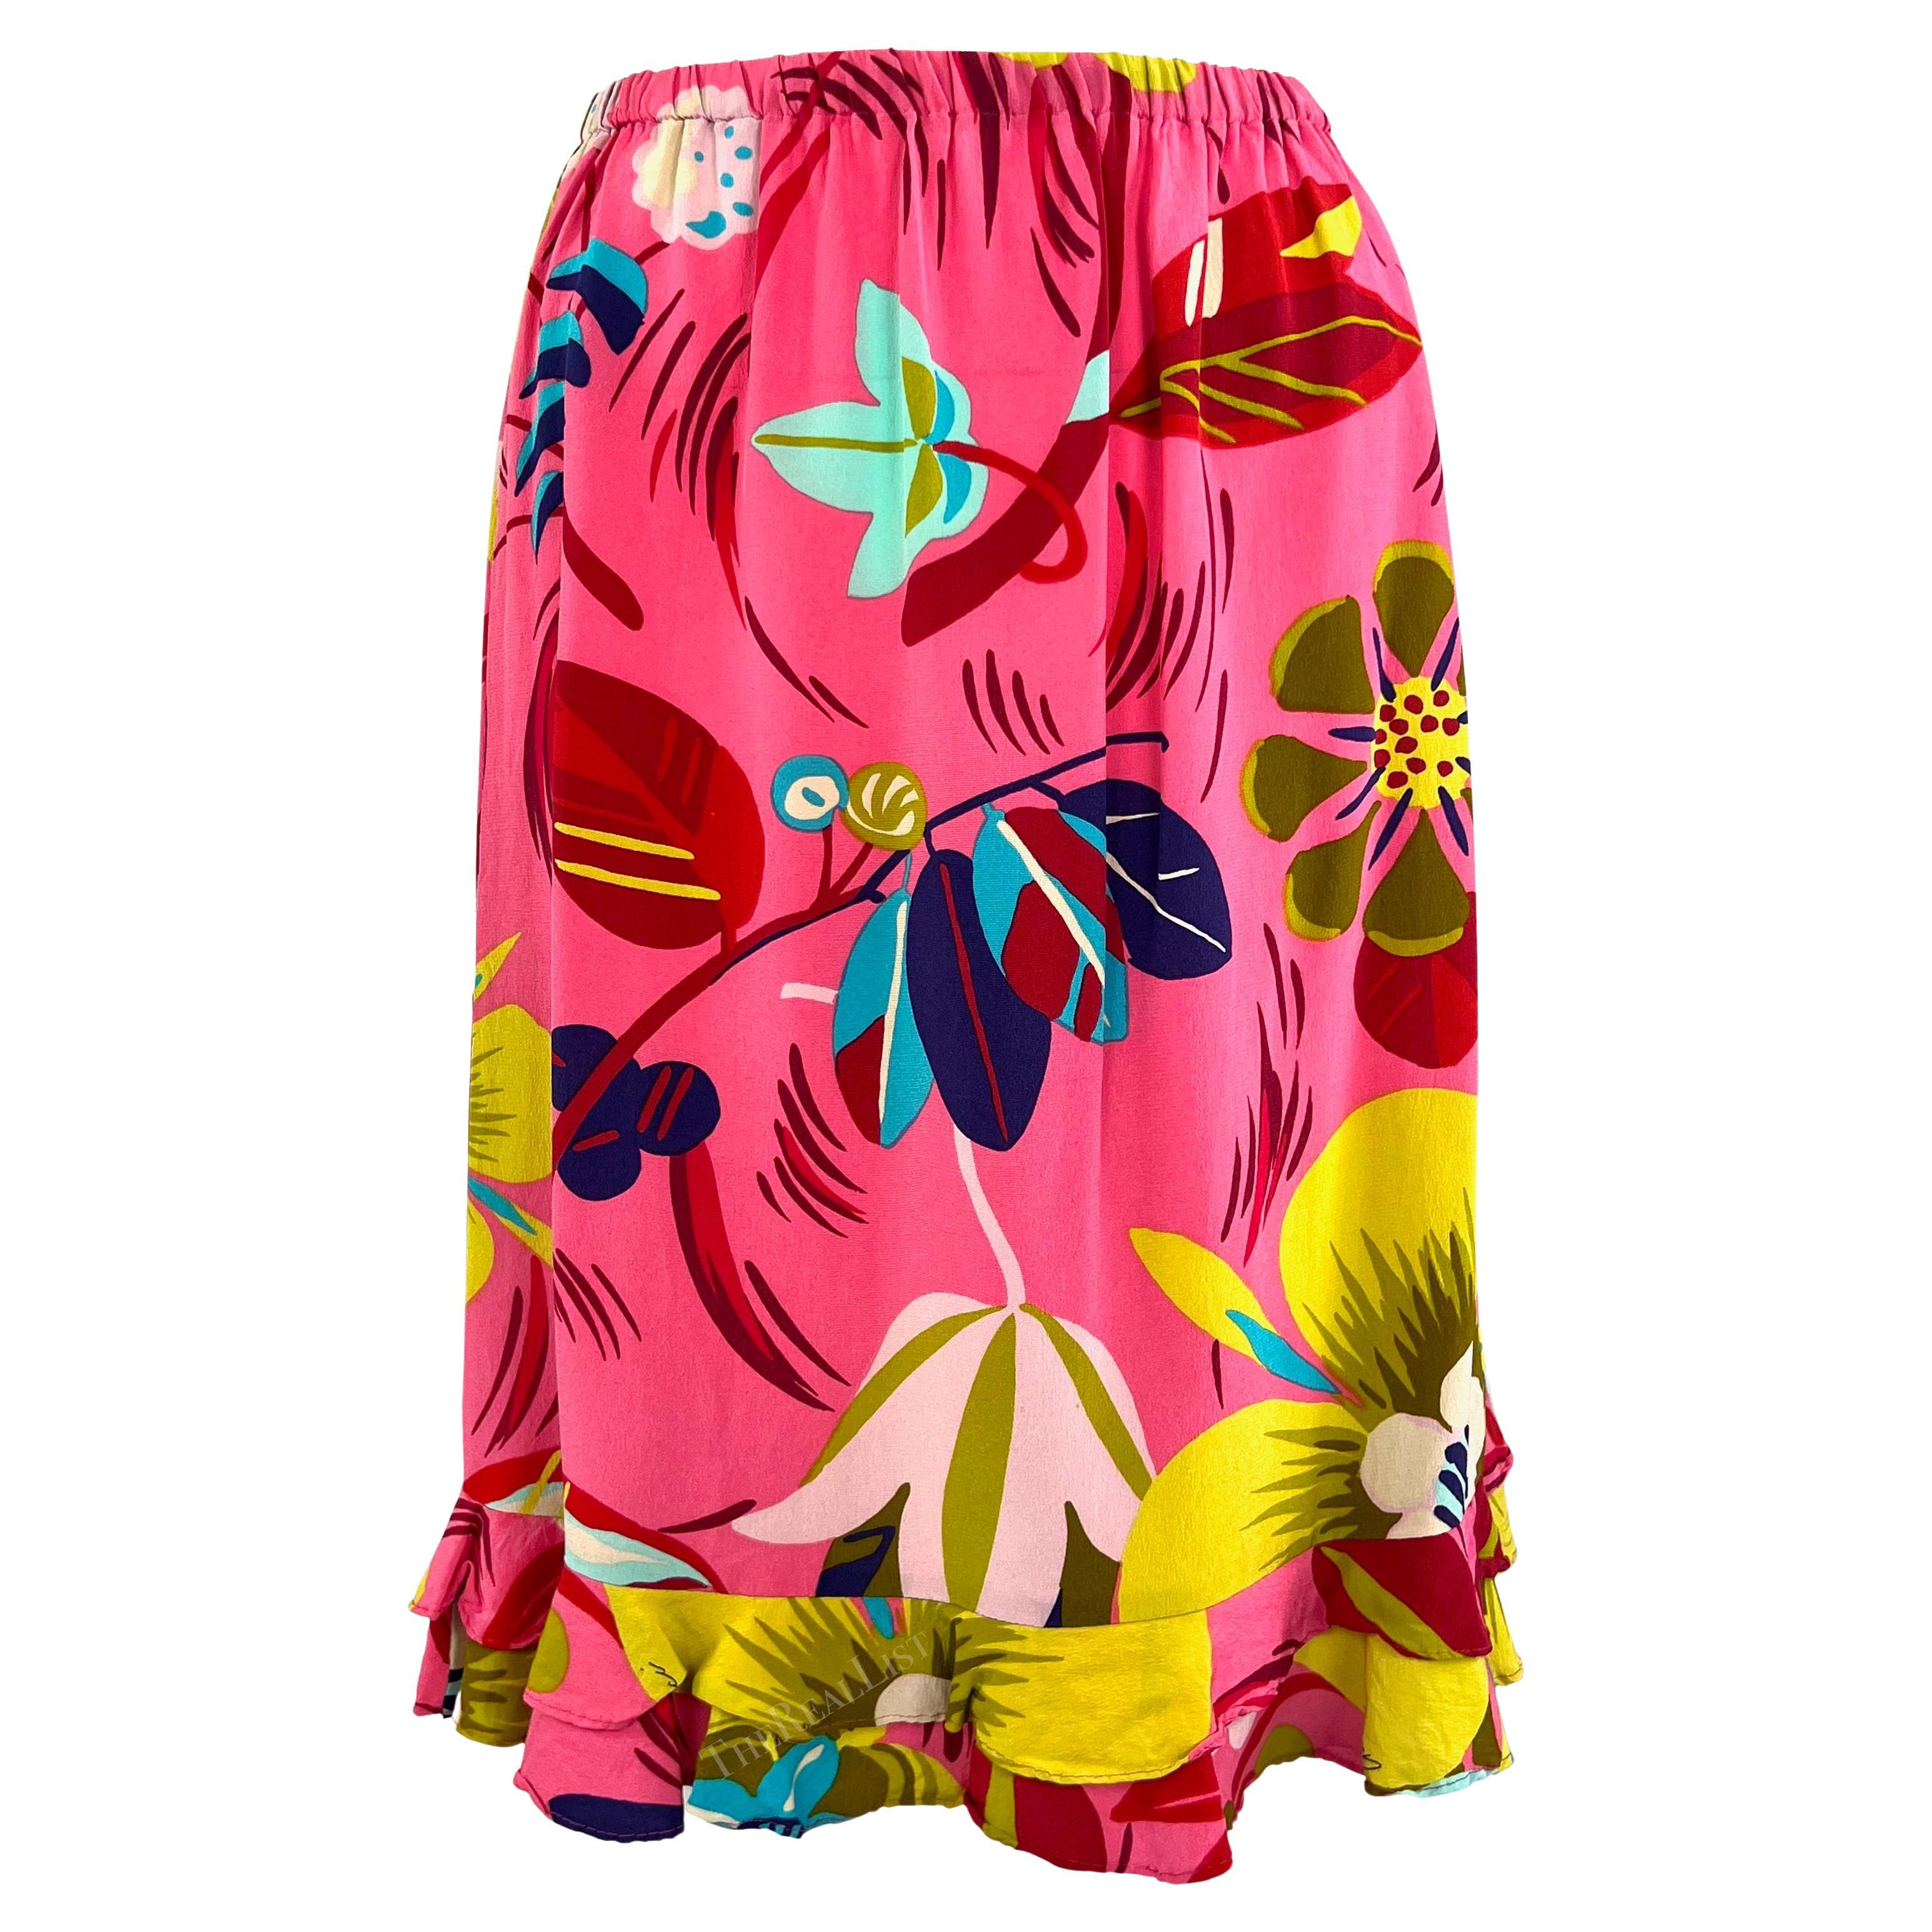 S/S 1999 Gucci by Tom Ford Vegas Hippy Runway Pink Silk Acid Floral Ruffle Skirt For Sale